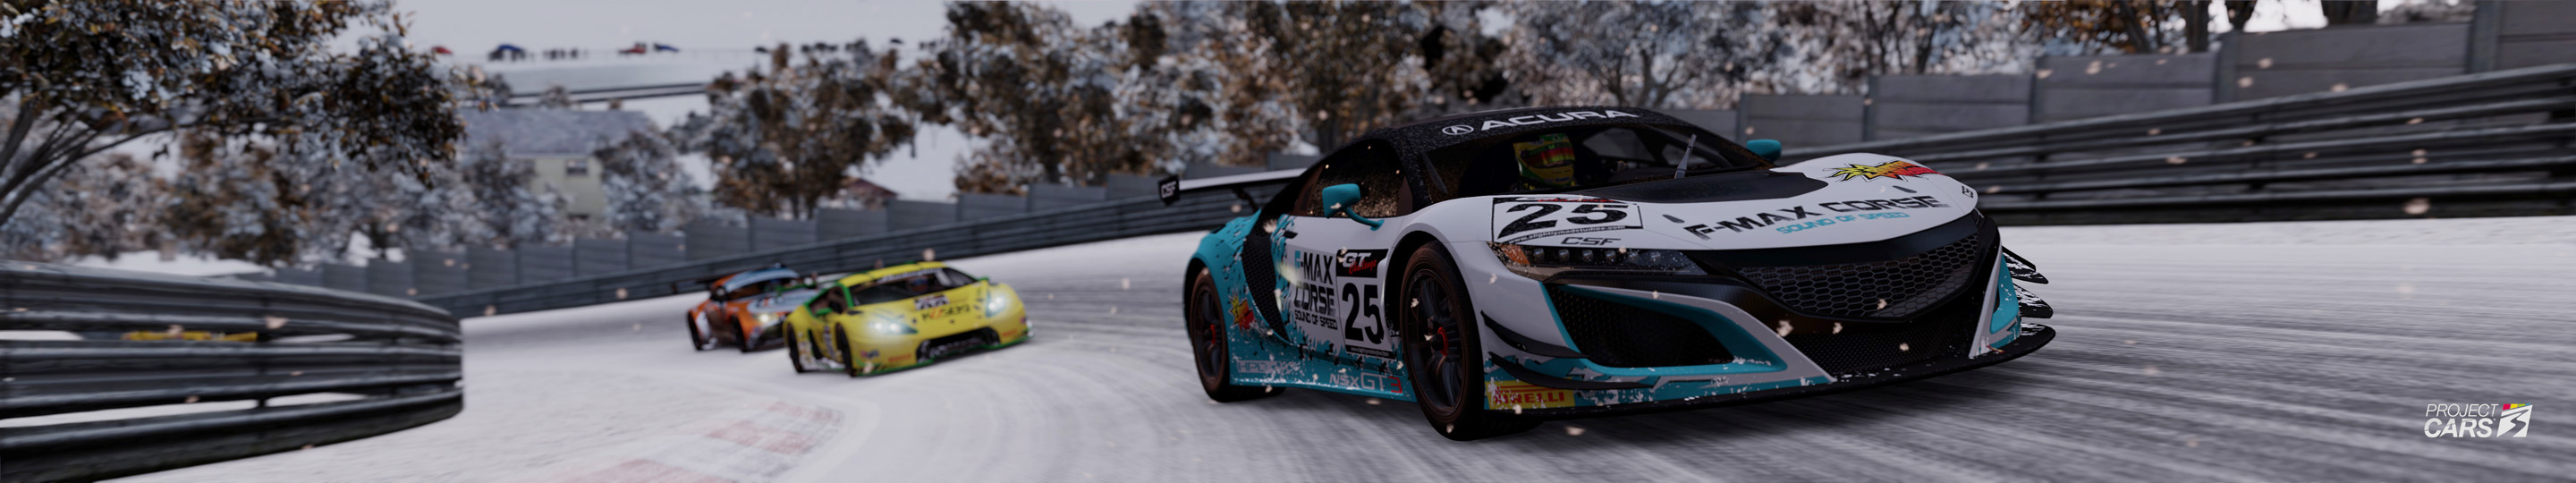 3 PROJECT CARS GT3 at NORDS Snow copy.jpg